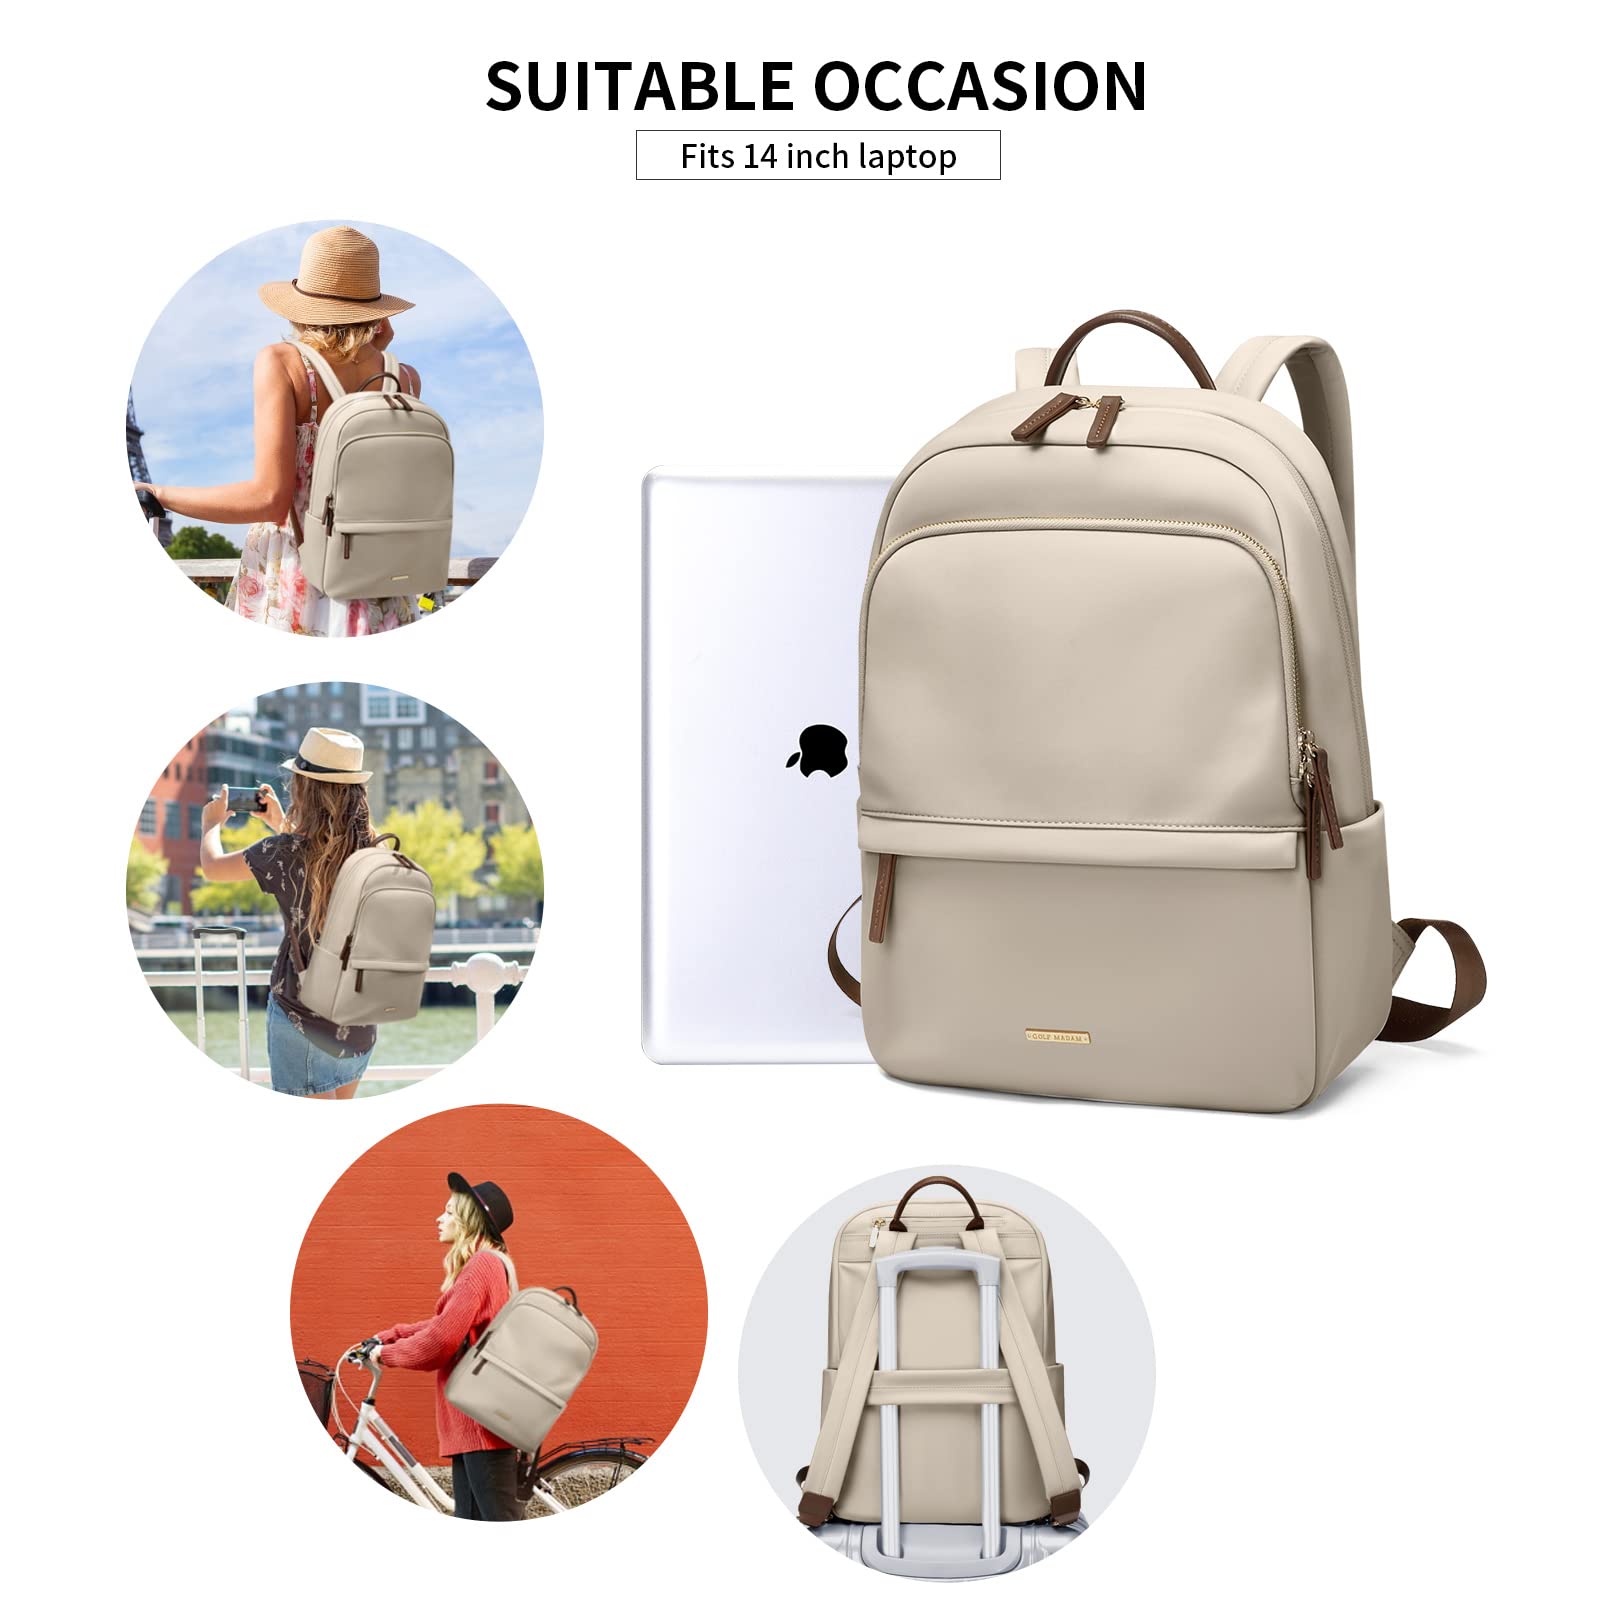 GOLF SUPAGS Laptop Backpack for Women Slim Computer Bag Work Travel College Backpack Purse Fits 14 Inch Notebook (Apricot)